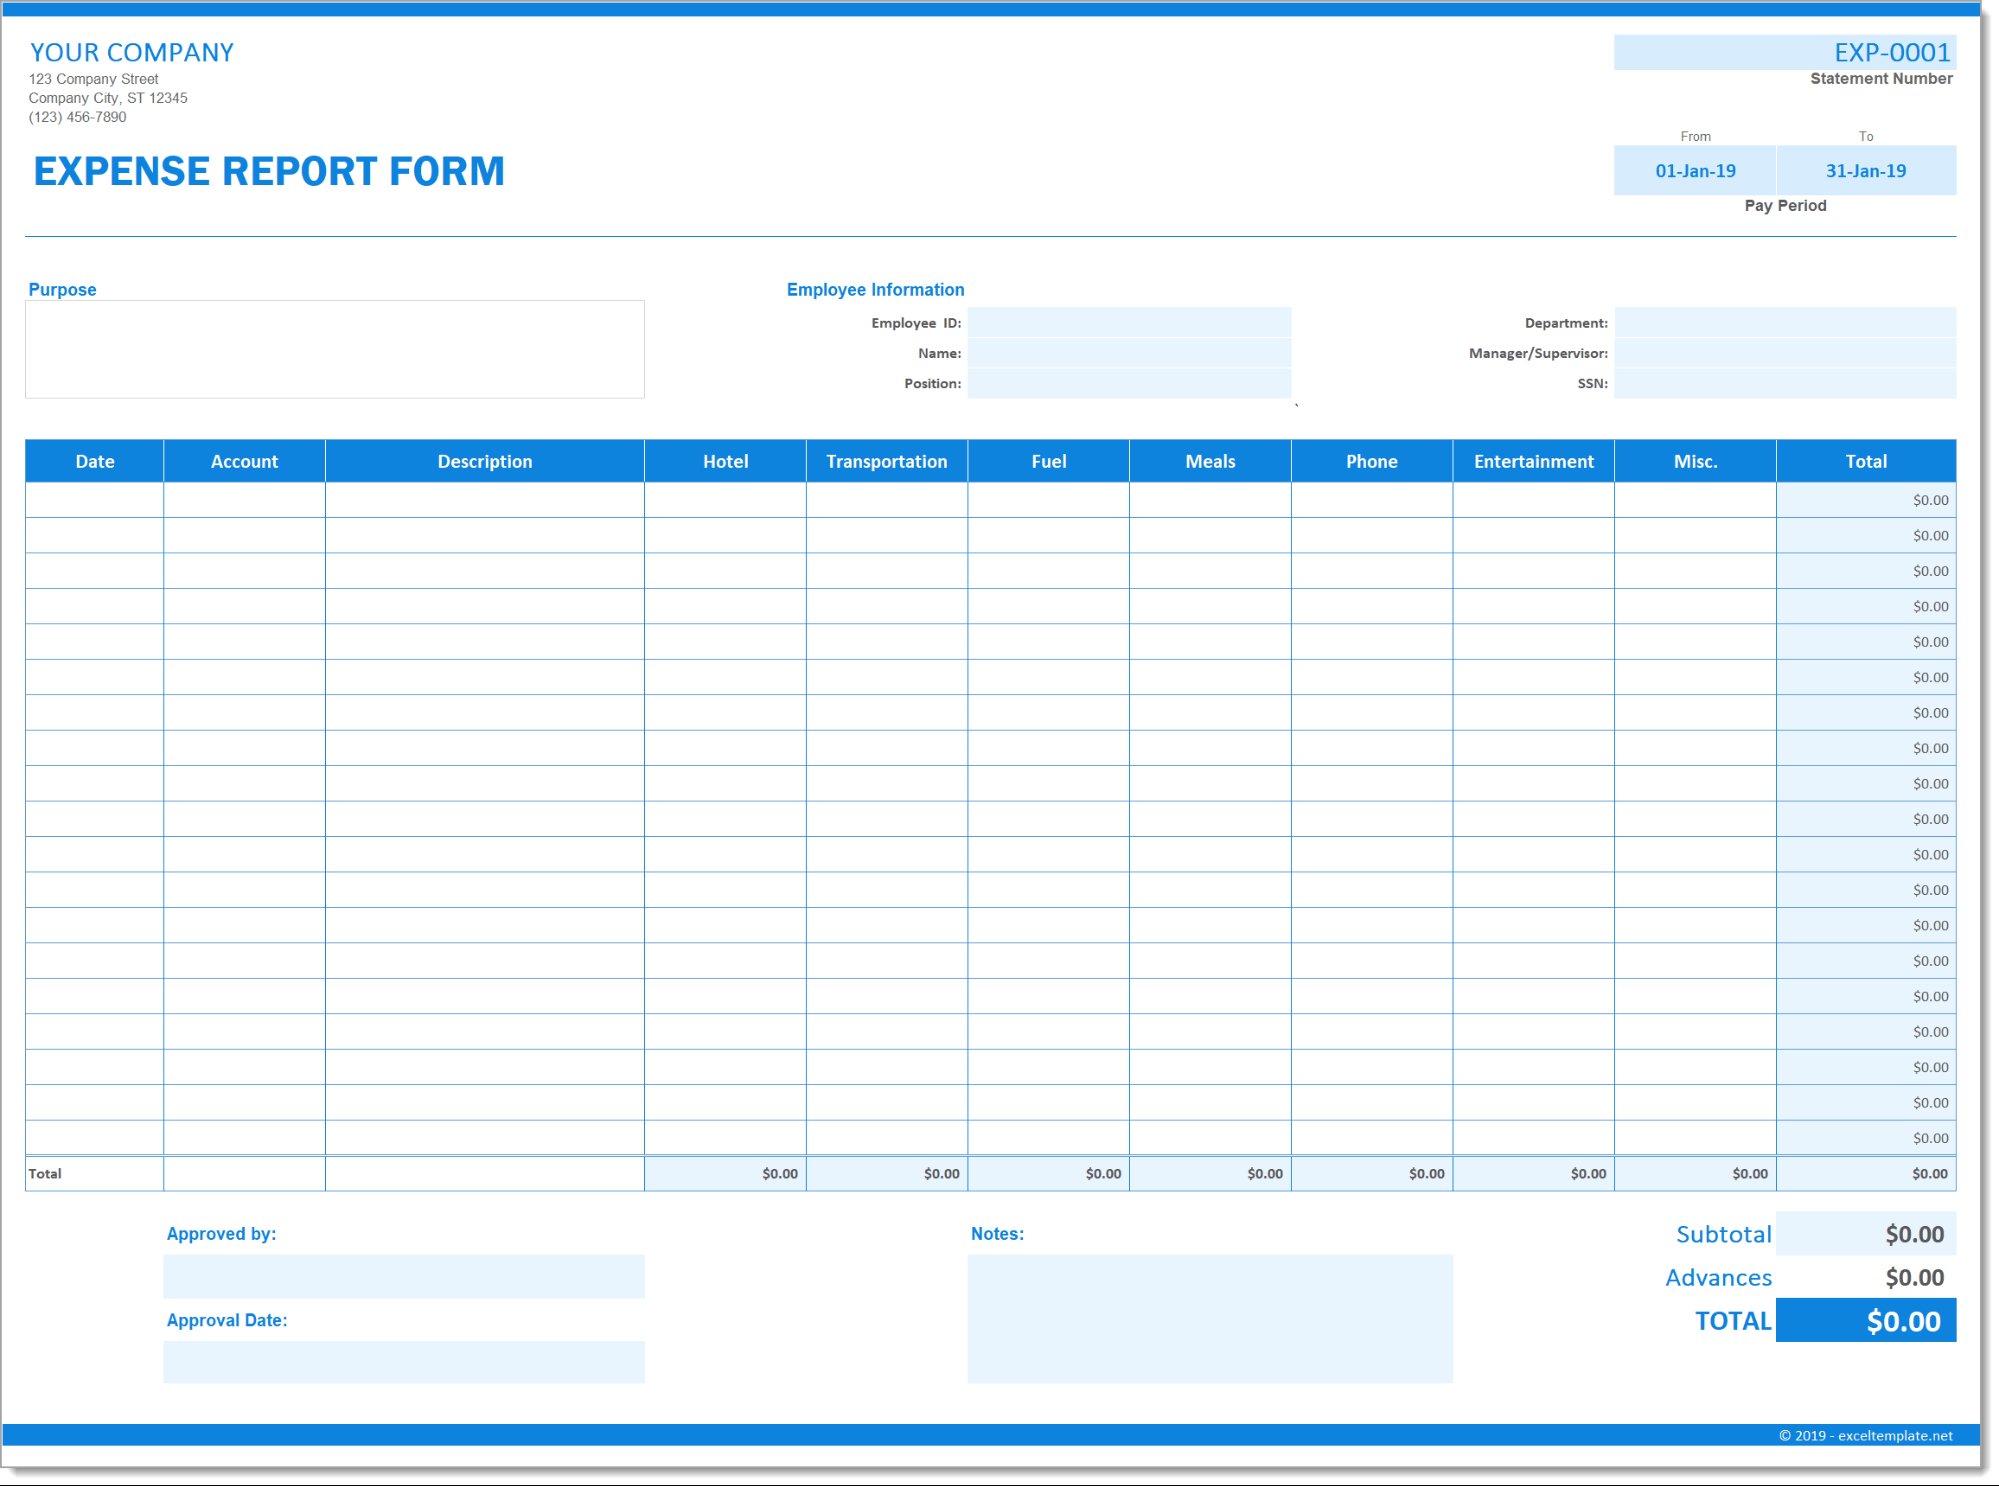 Expense Report Form For Gas Mileage Expense Report Template